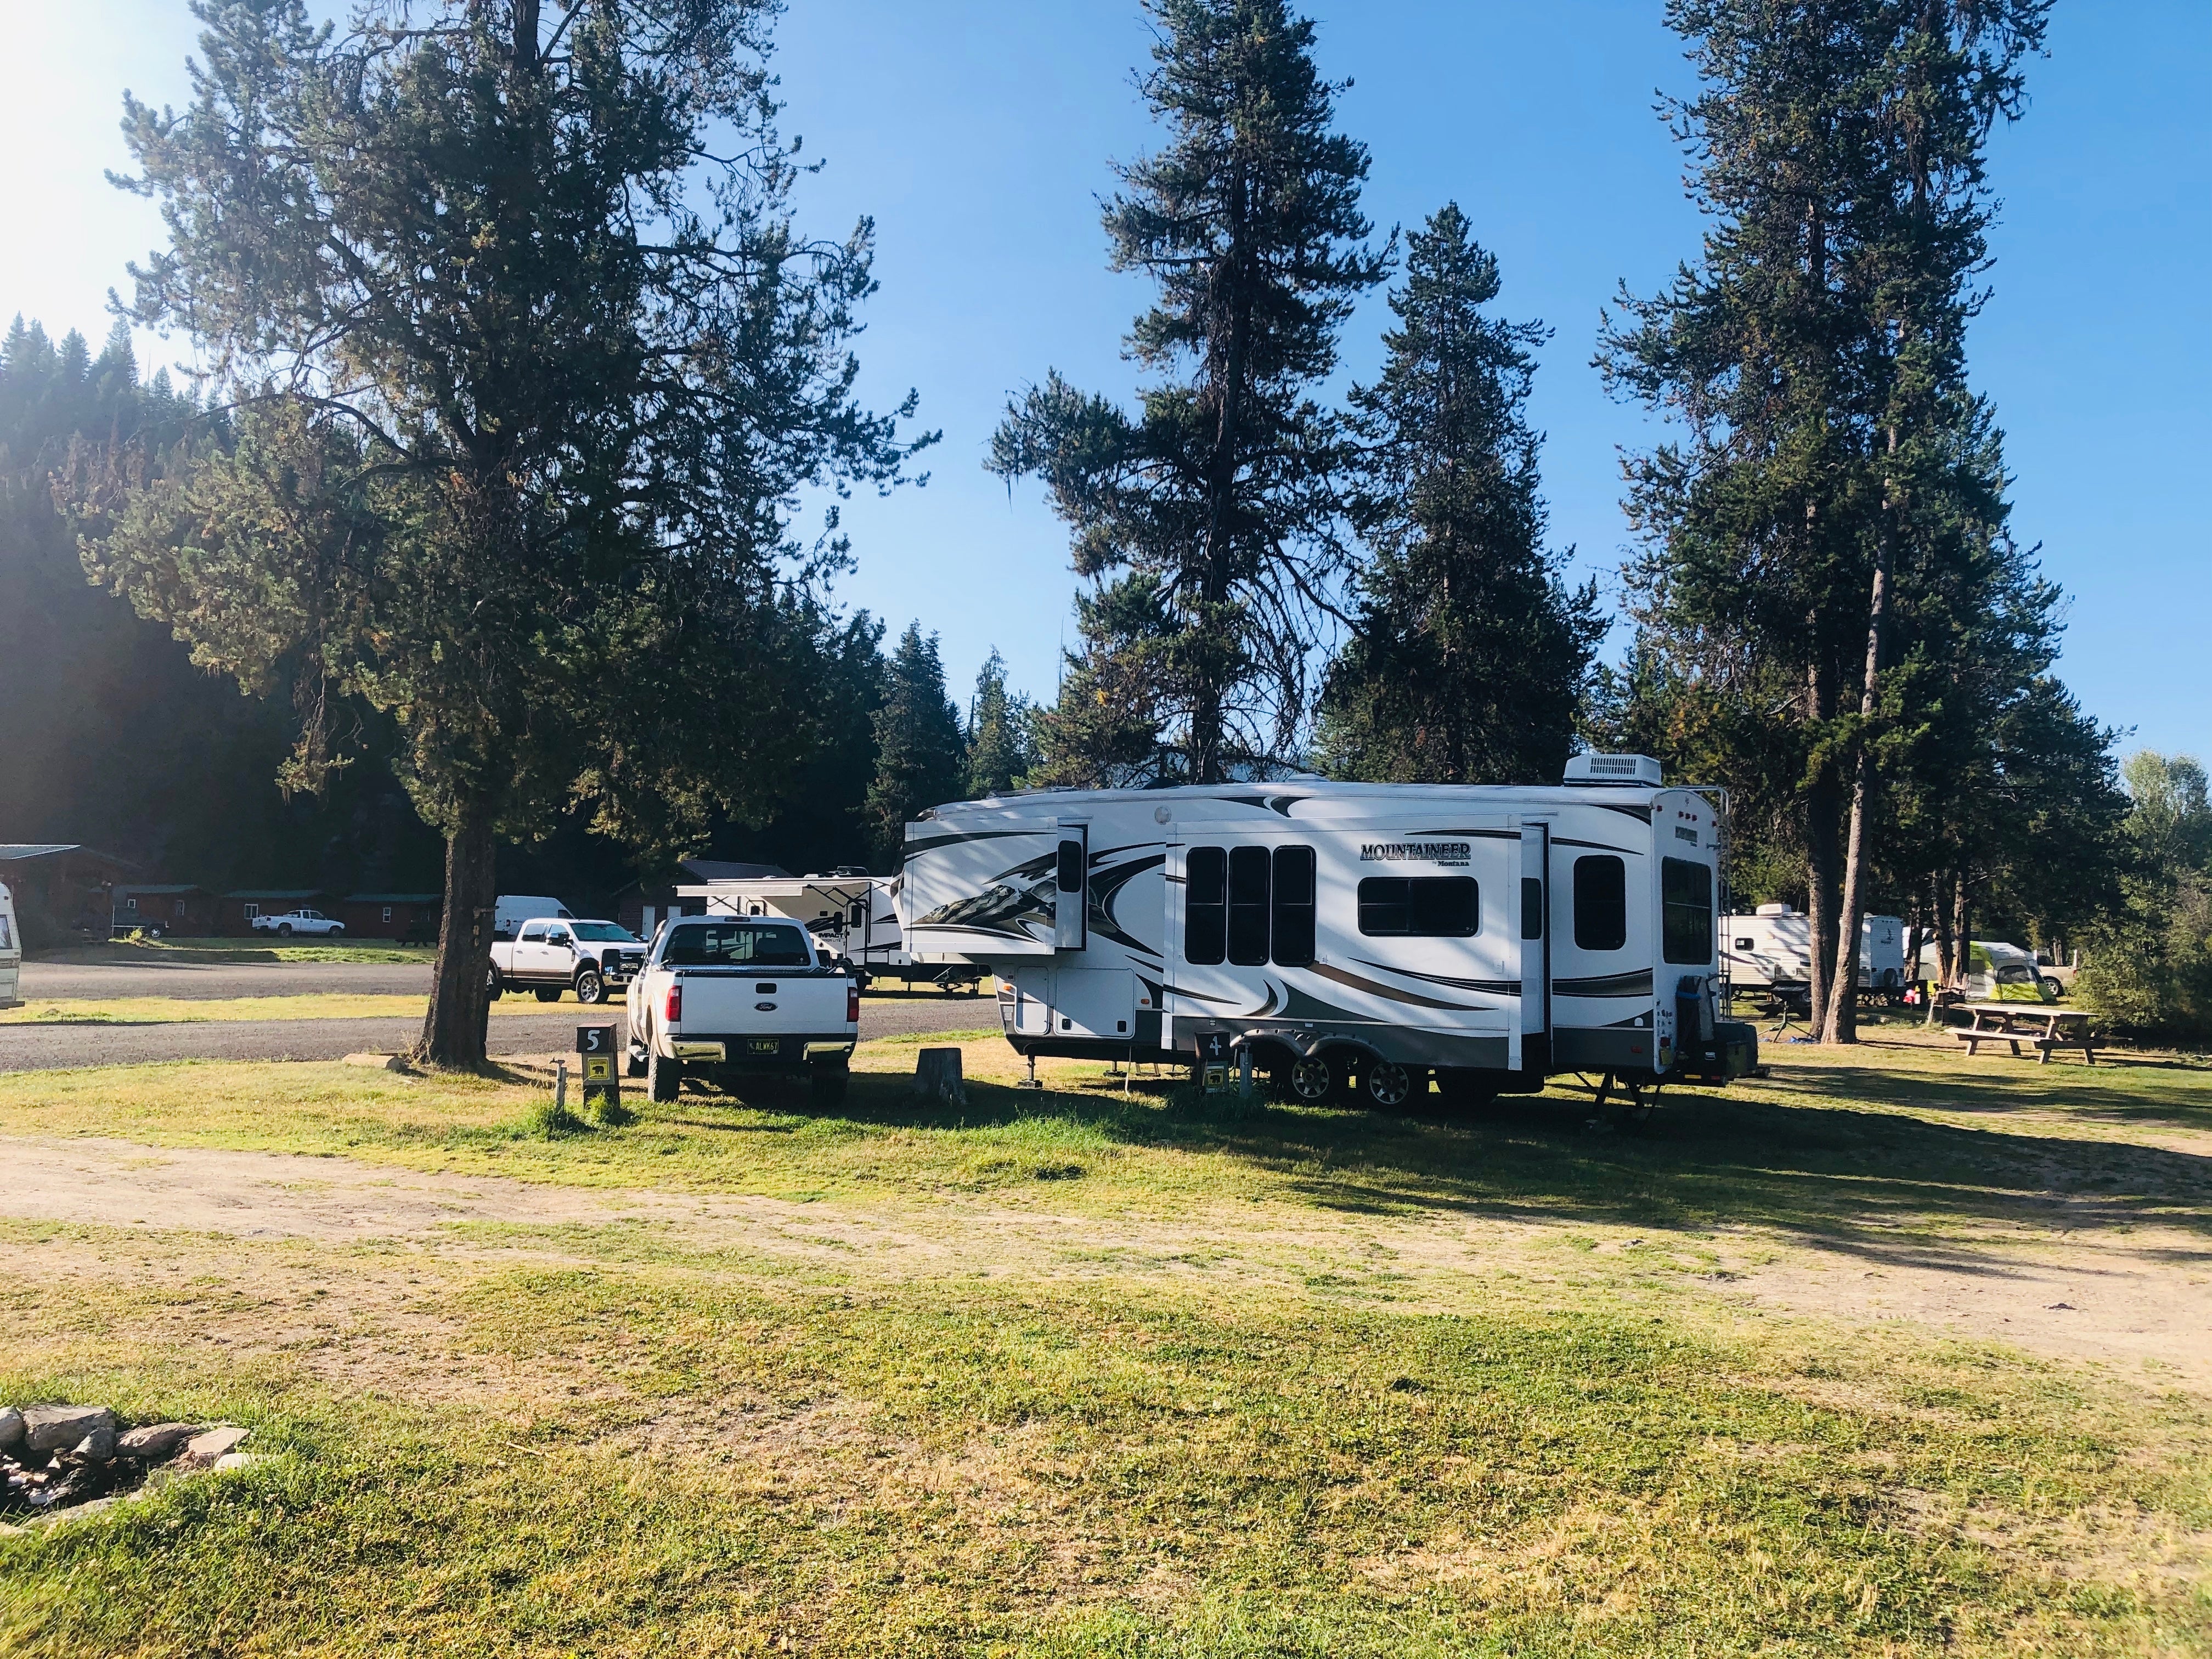 Camper submitted image from Lolo Hot Springs Campground - 3